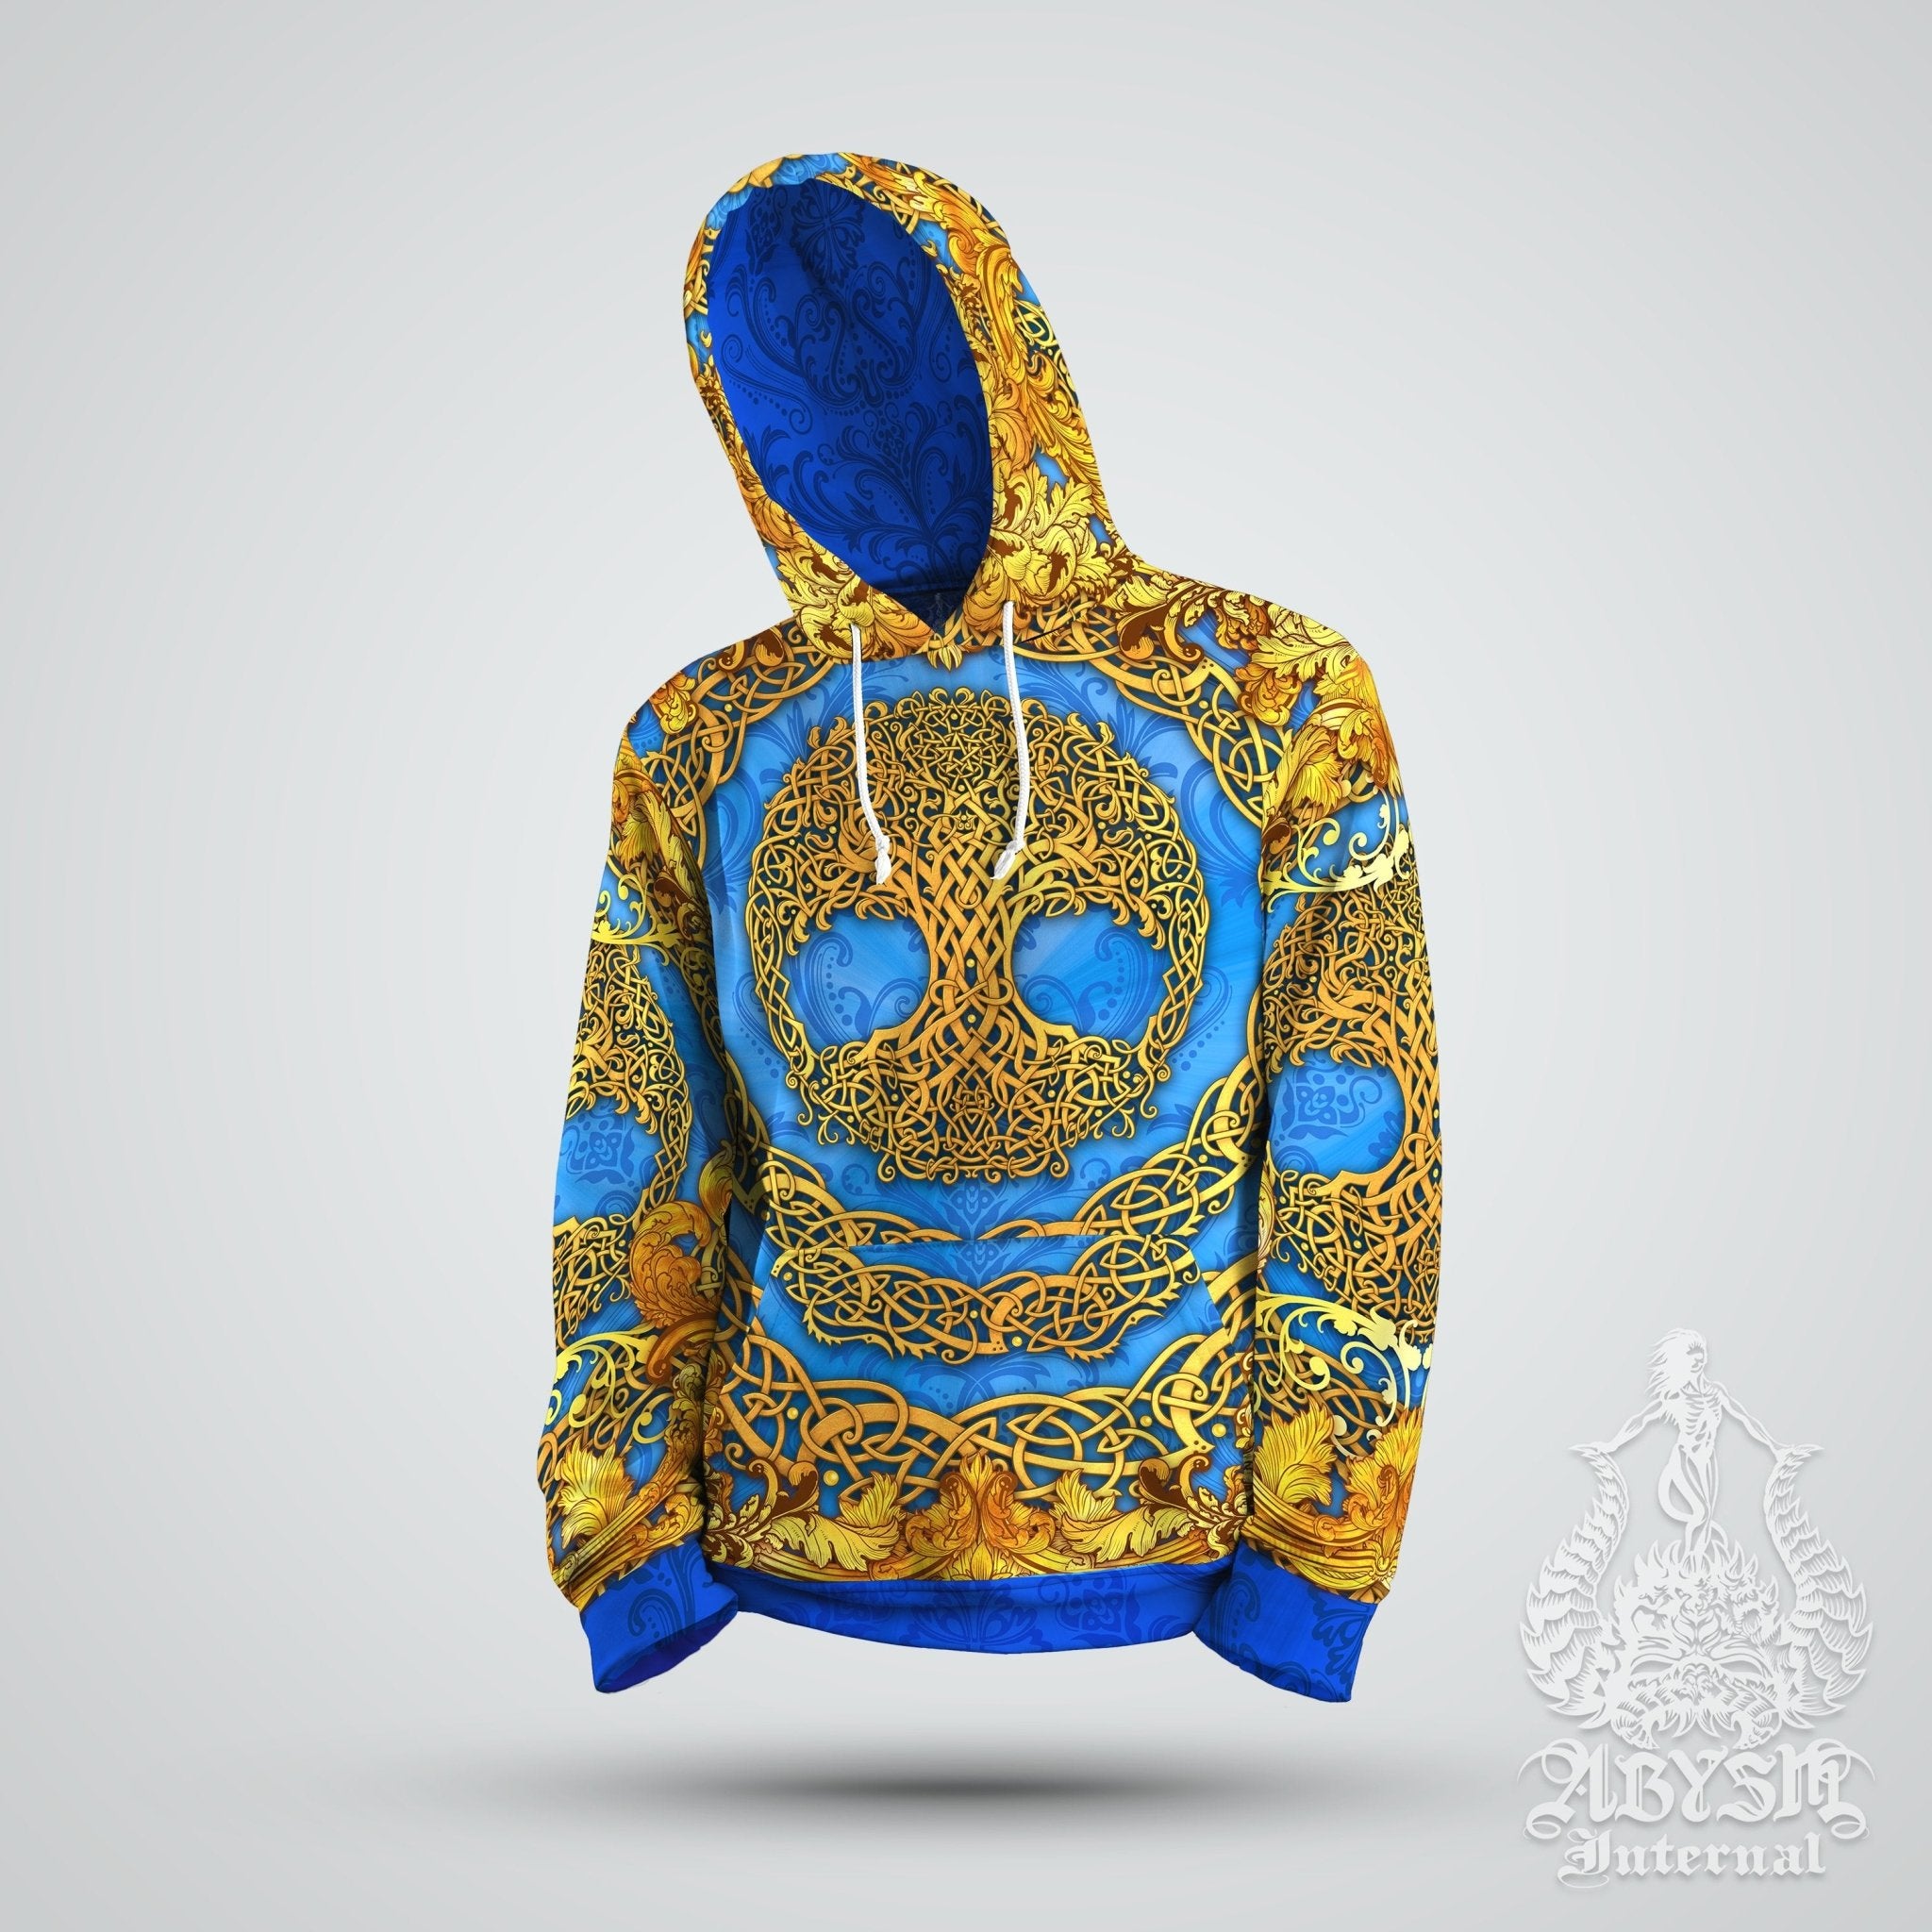 Tree of Life Hoodie, Boho Outfit, Indie Sweater, Witchy Streetwear, Alternative Clothing, Unisex - Cyan and Gold, Celtic - Abysm Internal